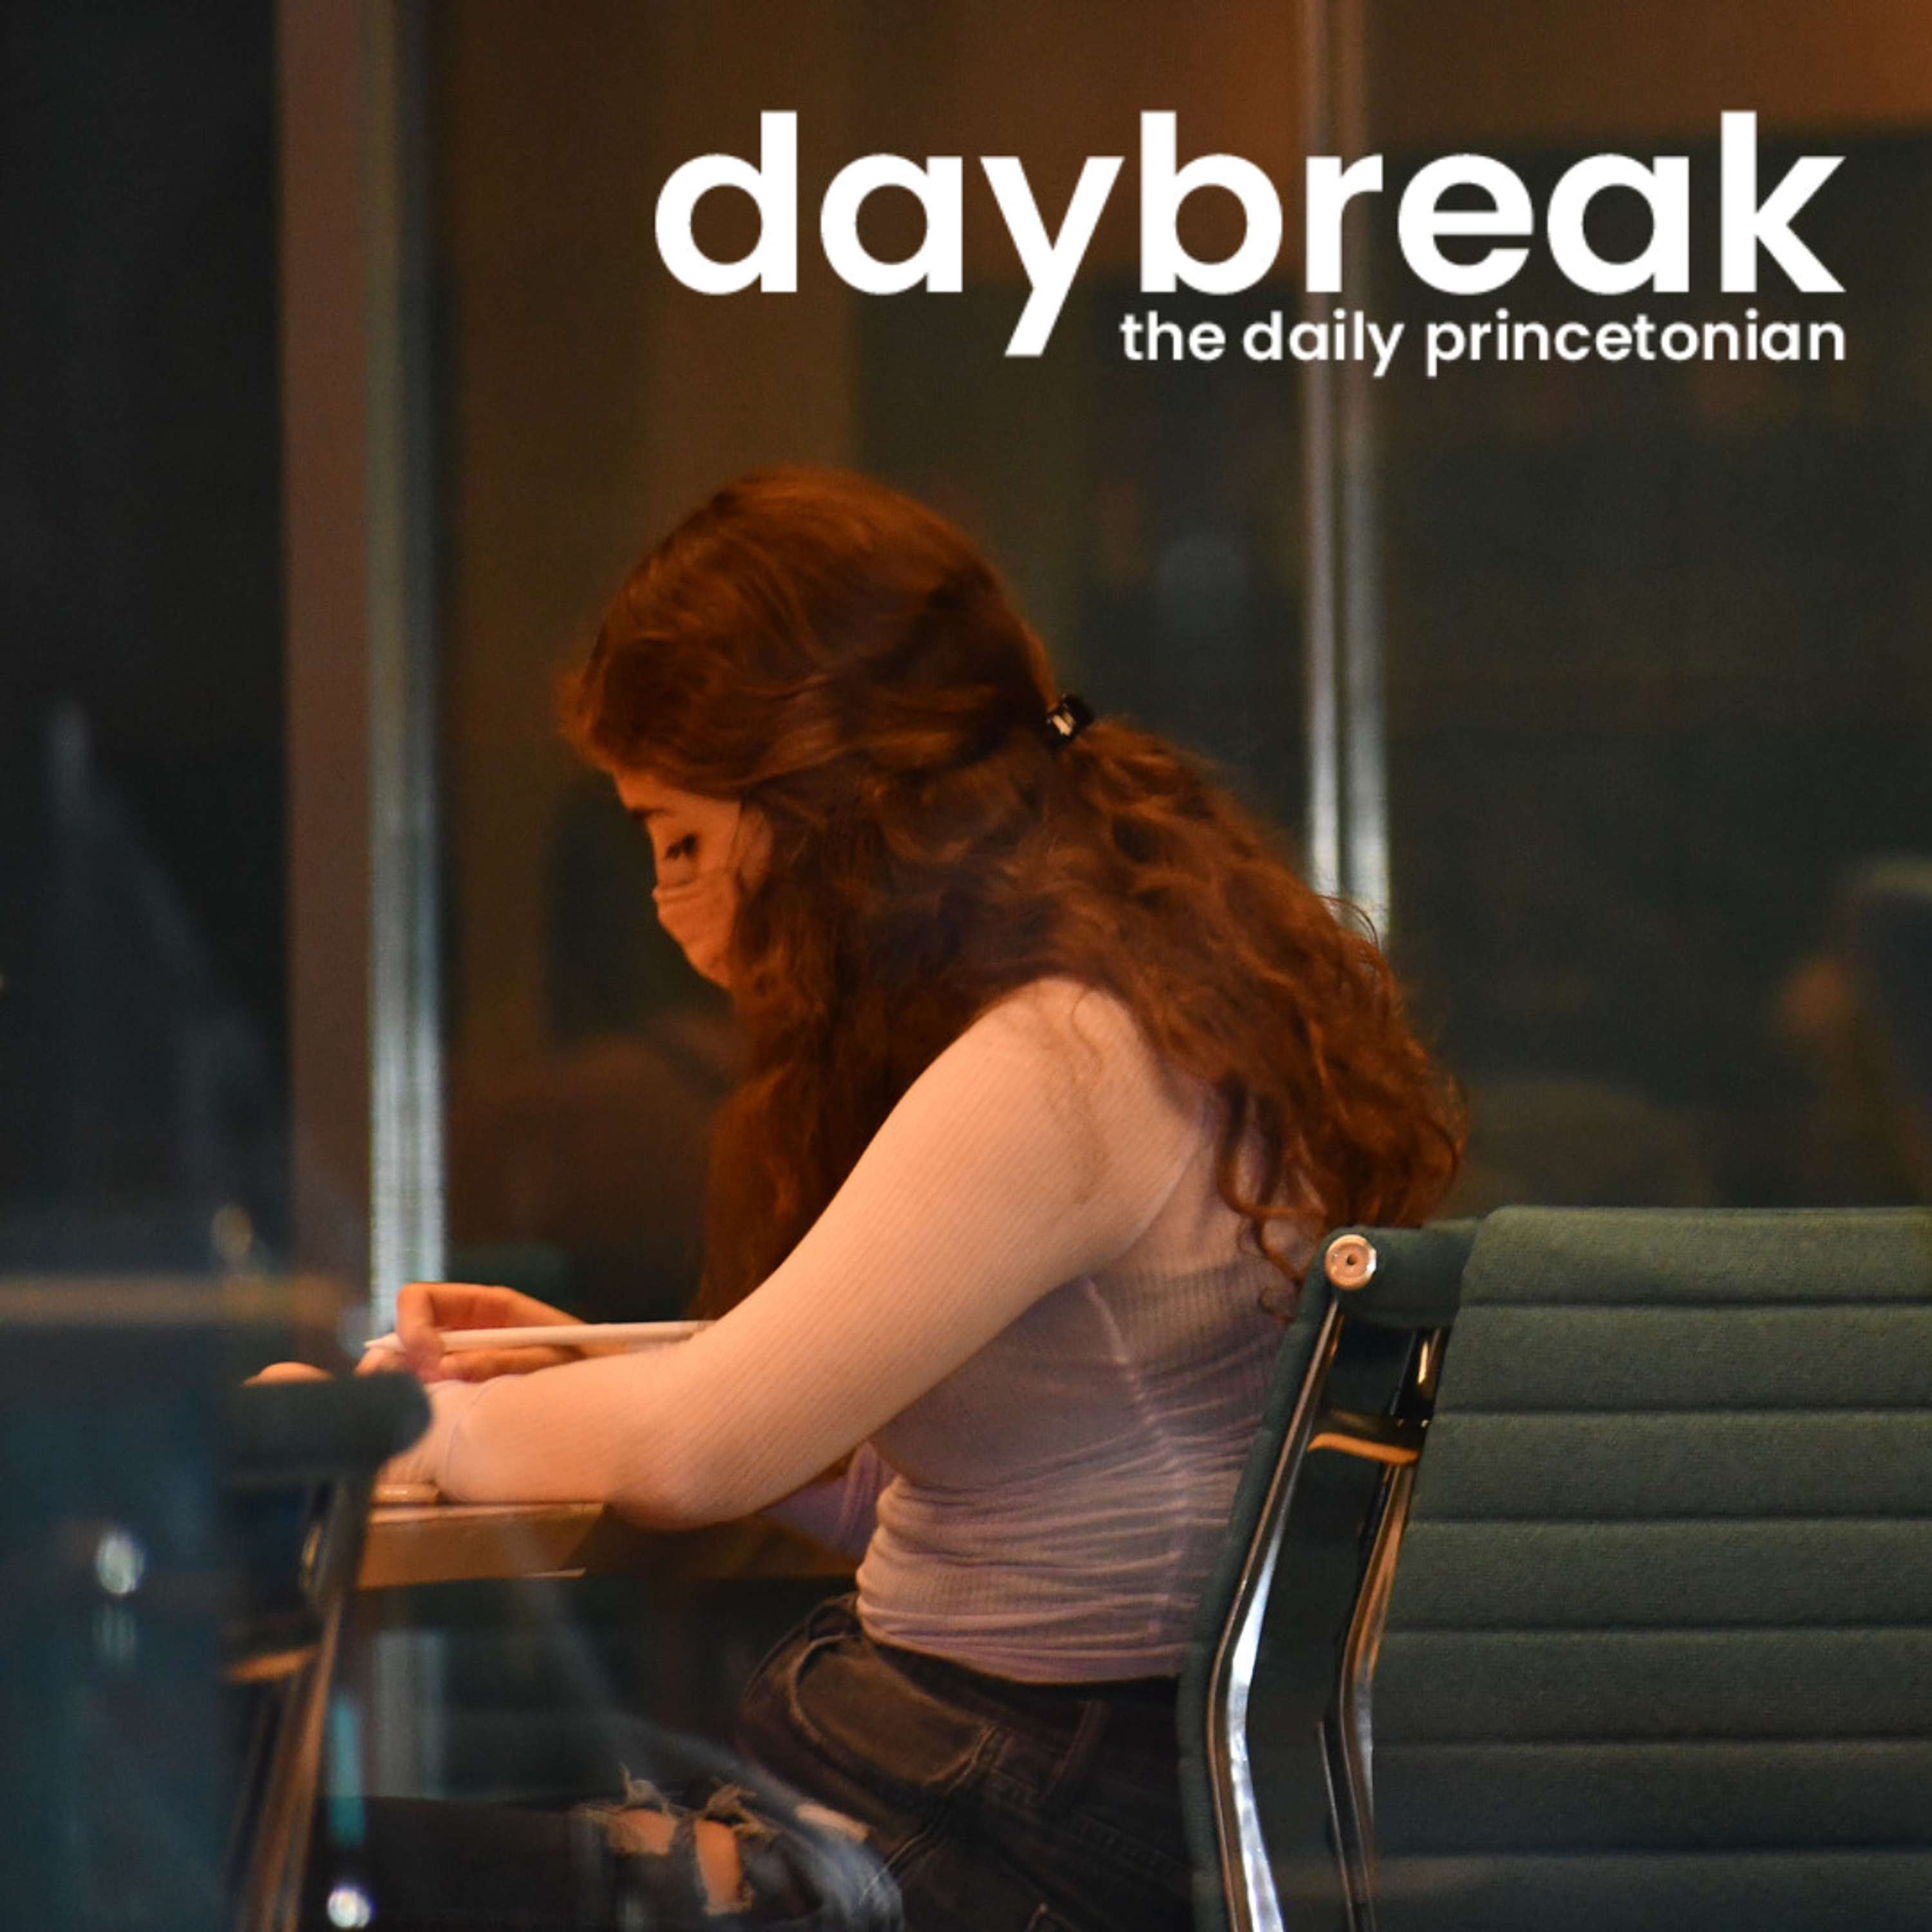 Learn to tackle midterms with Daybreak